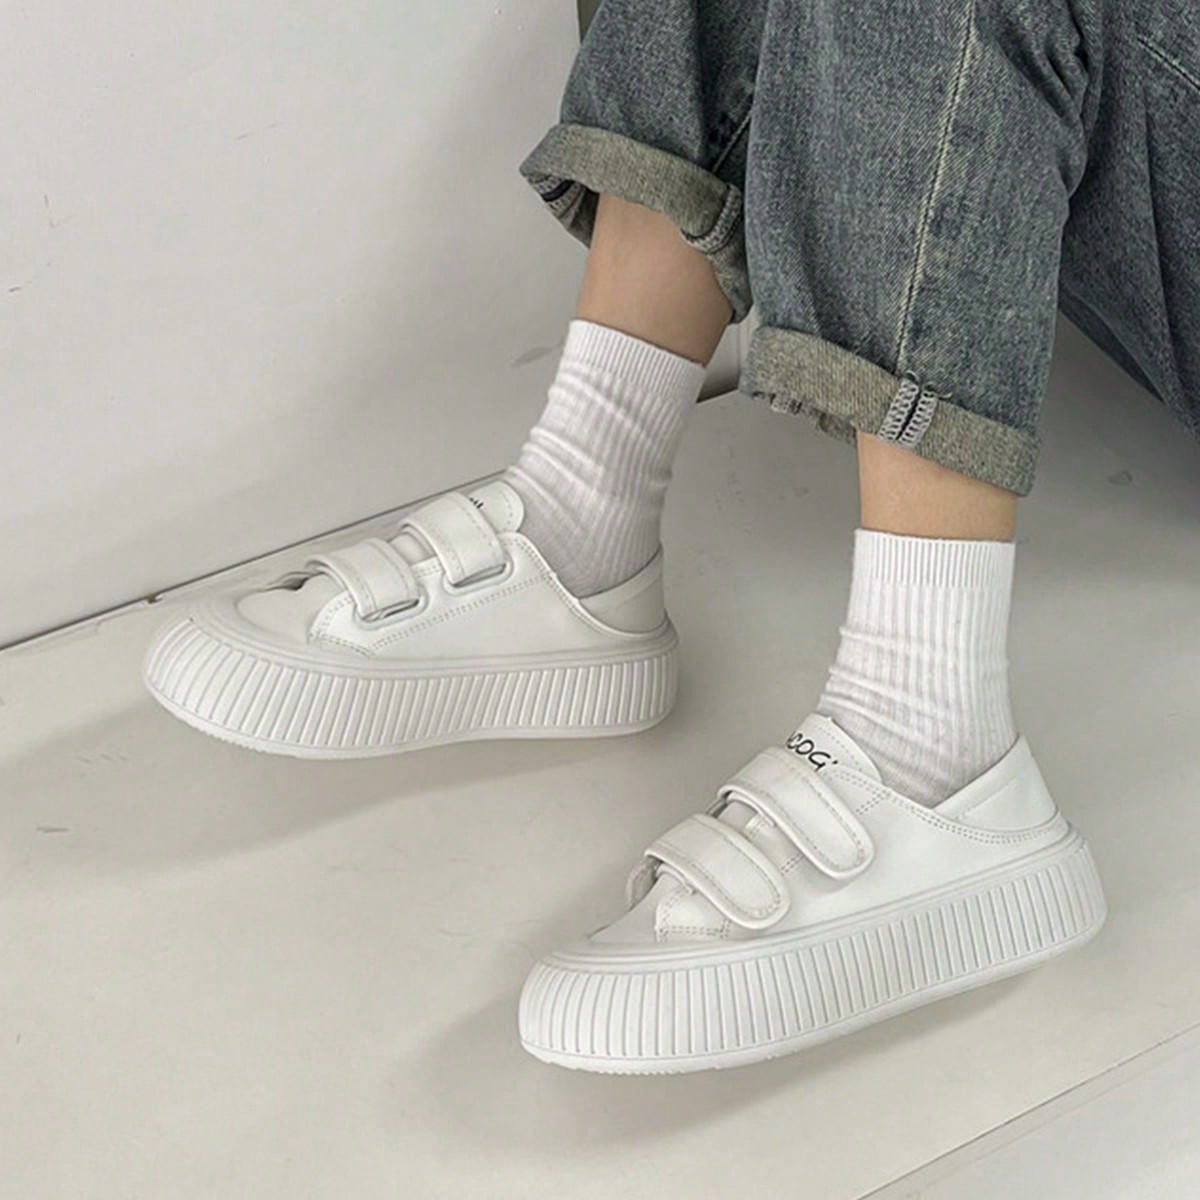 Women's White Outdoor Comfortable Casual Sneakers